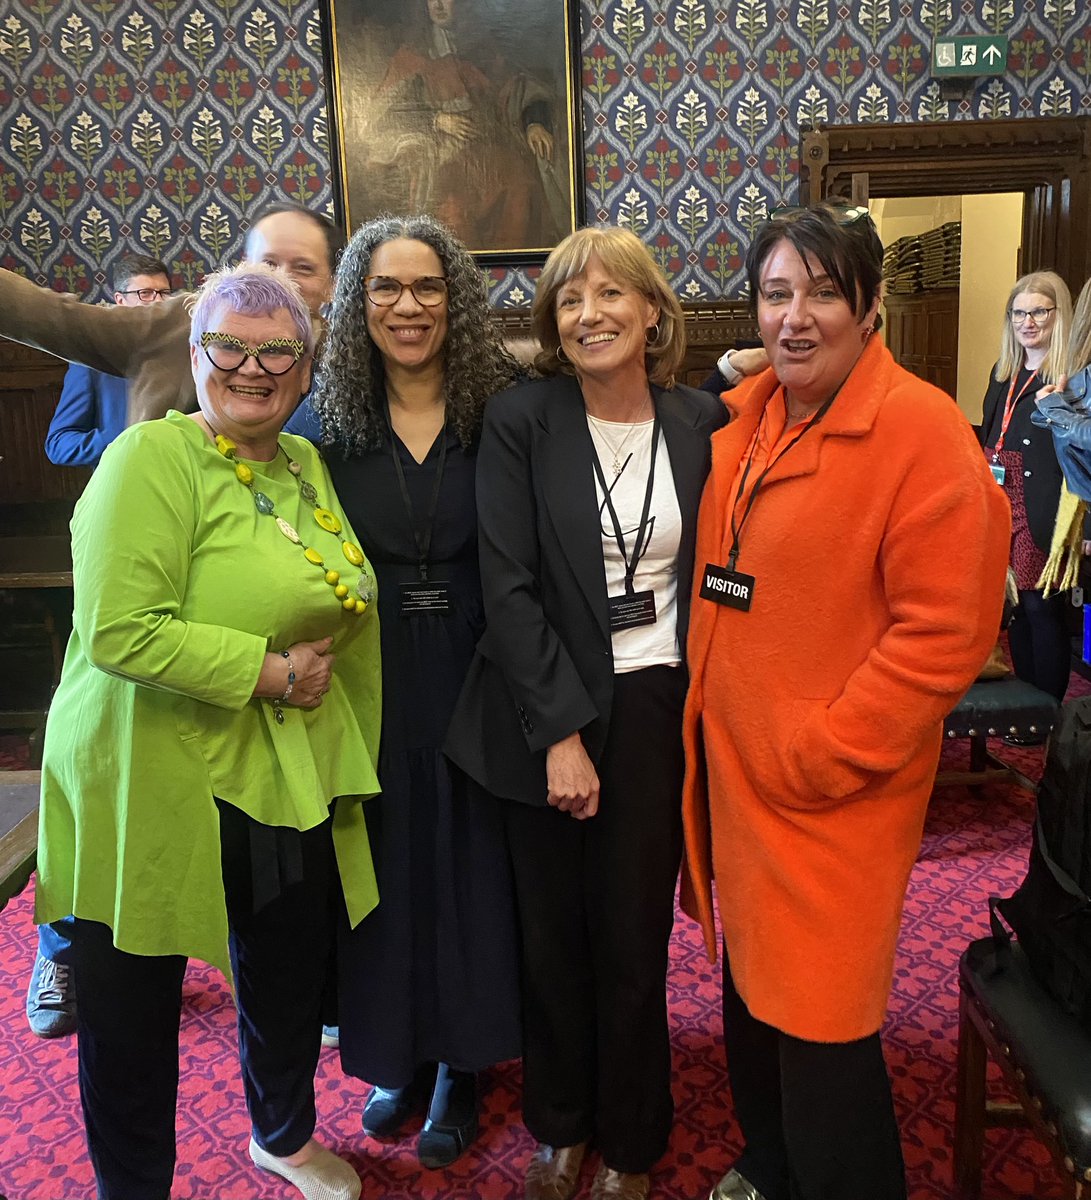 Meno Warriors assemble: @carolynharrismp Catherine Green who is working on equity in @nhsengland menopause care, me, and Tina Backhouse from Theramex at the Commons at the launch of a report revealing that 23% of white women are on HRT but only 5% of Black women. Time for change